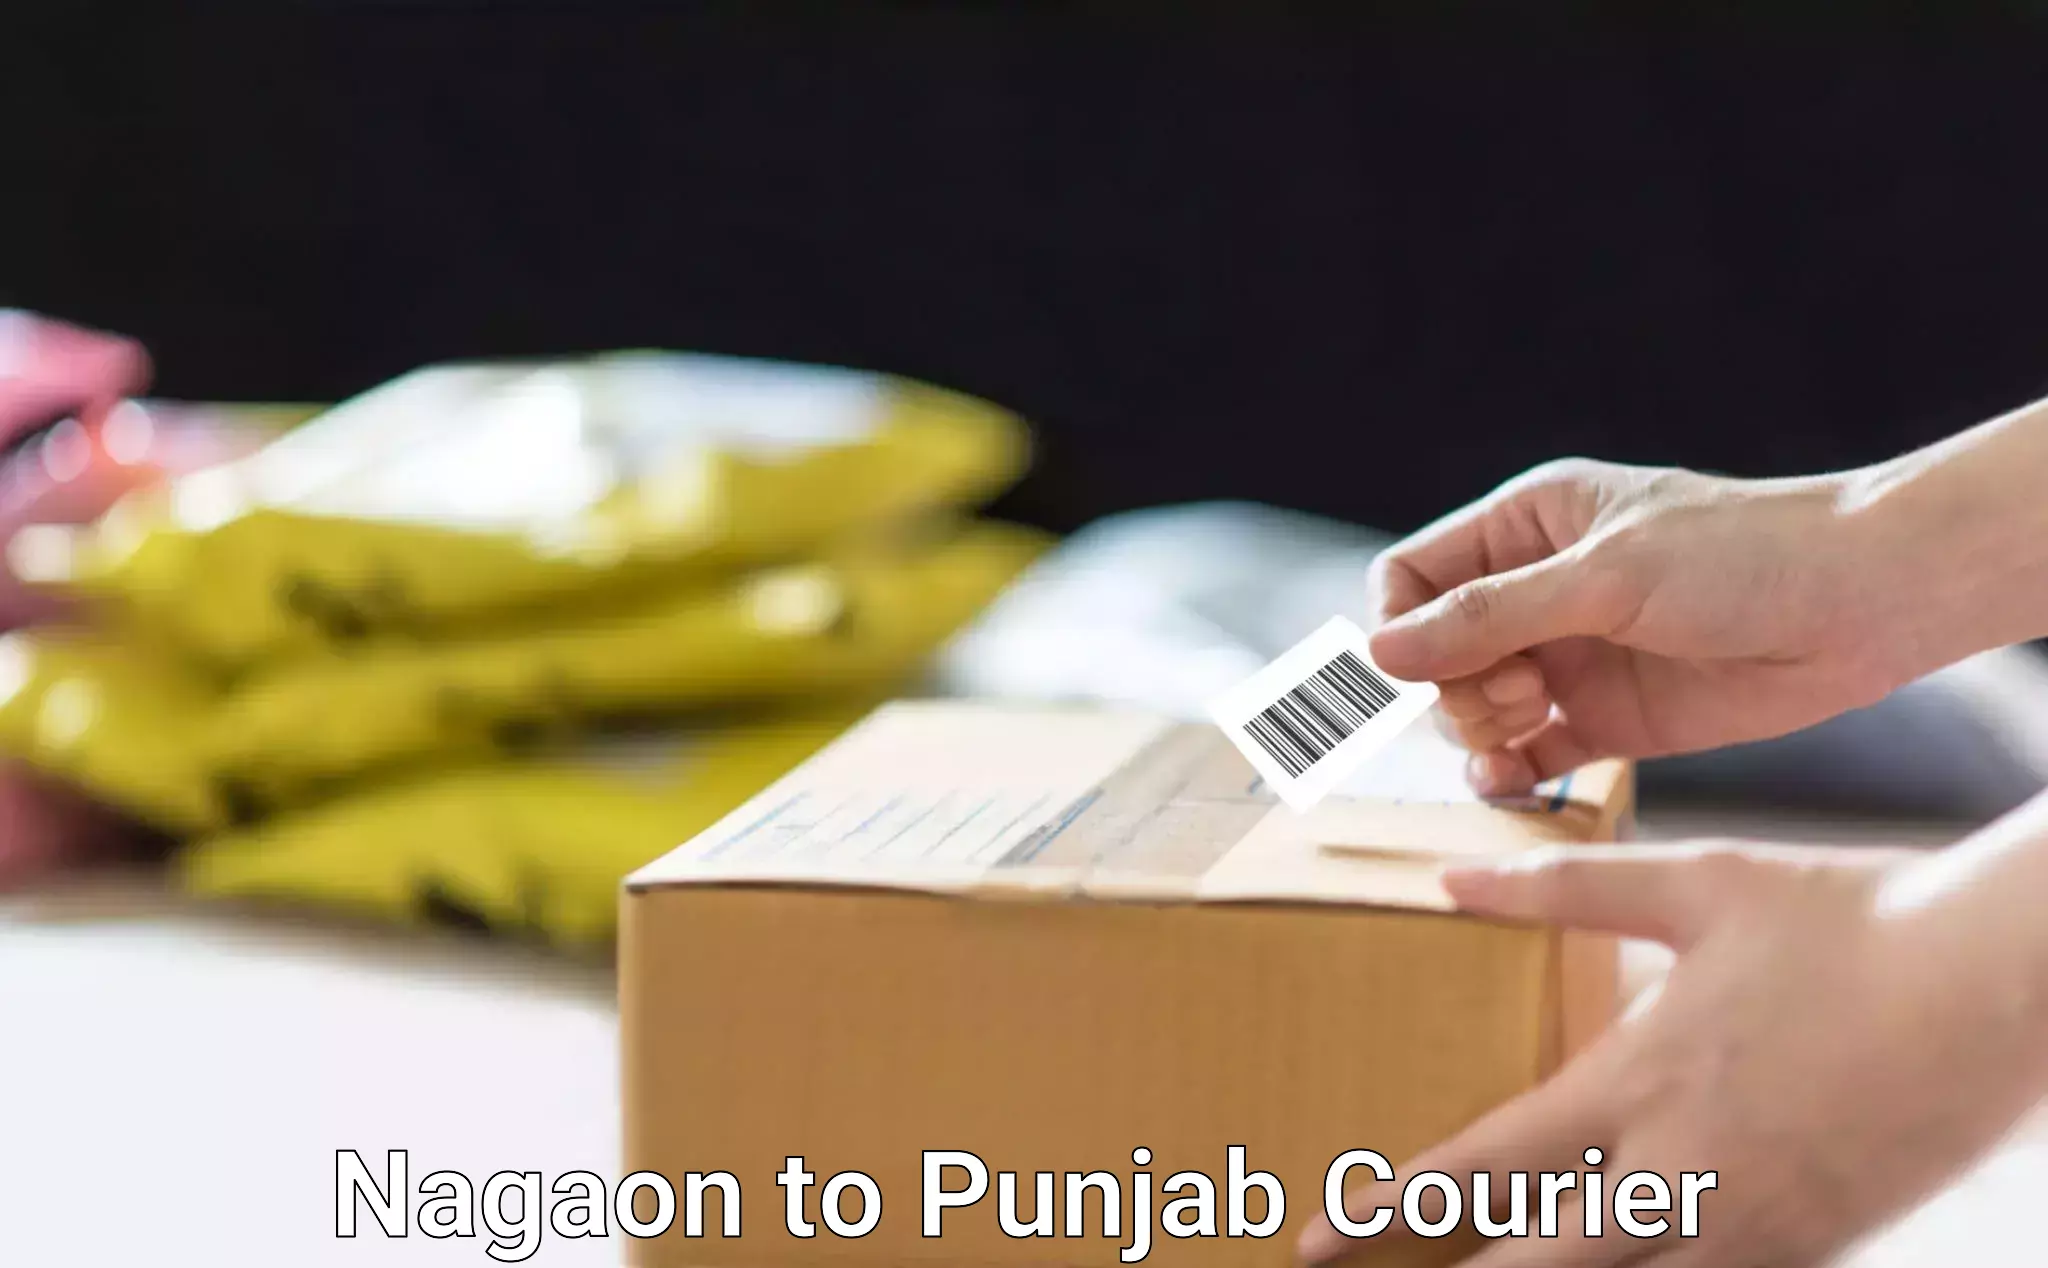 High-capacity courier solutions Nagaon to Pathankot